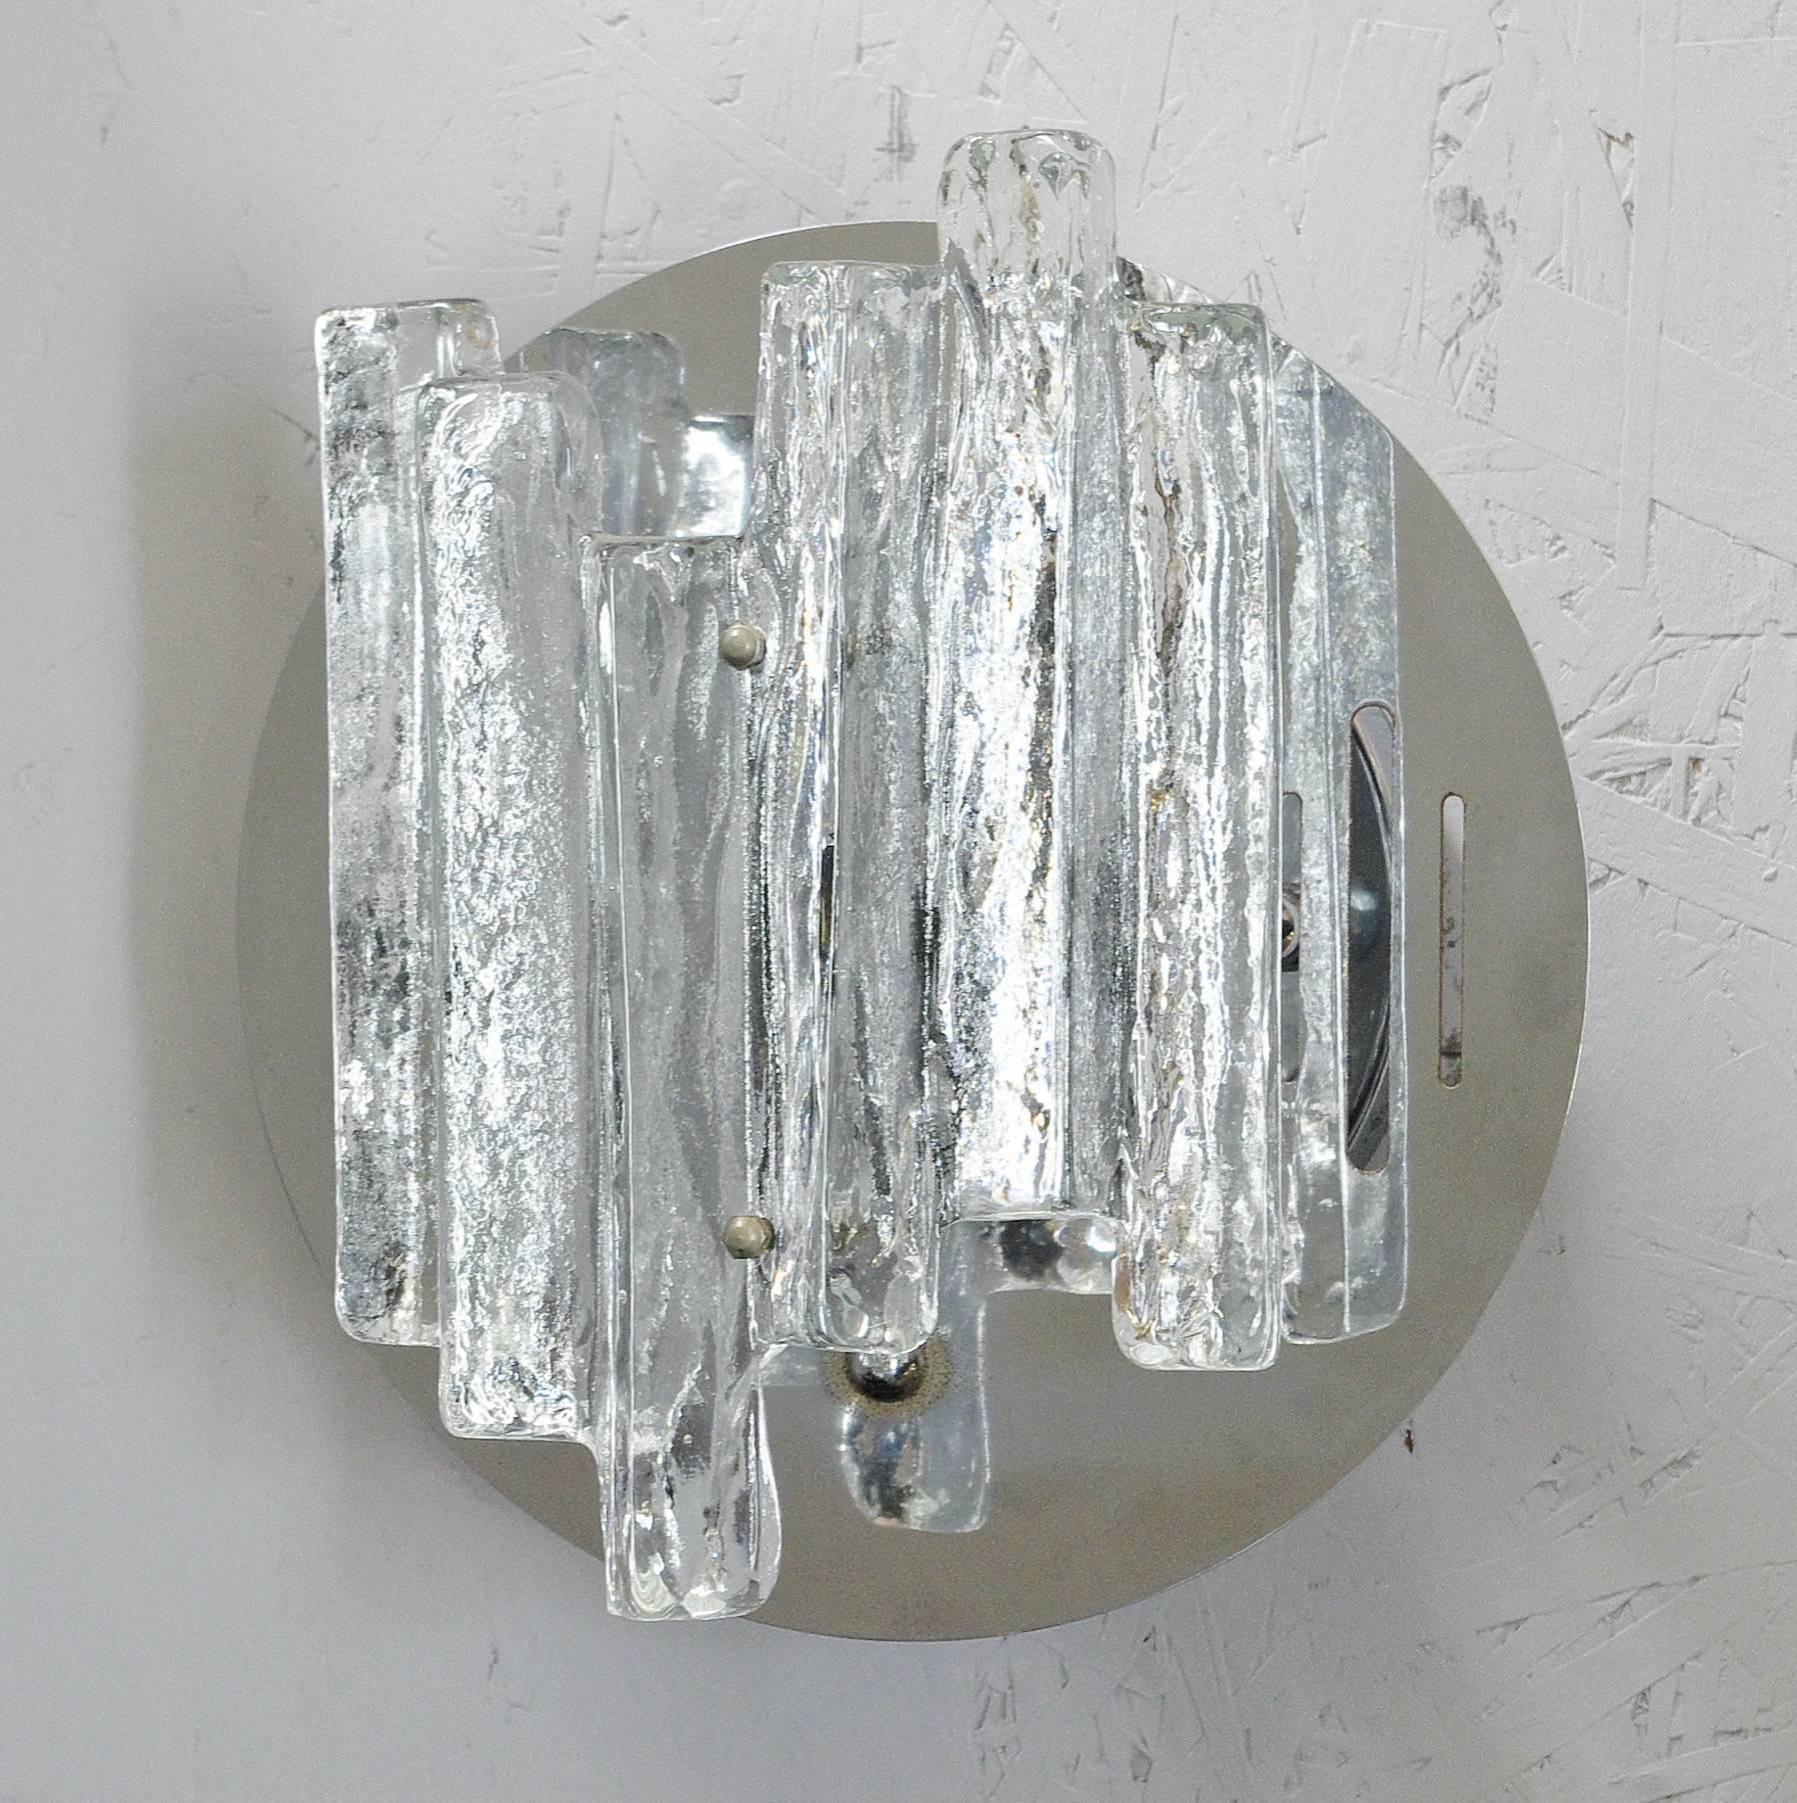 Set of three Italian sconces w/ flush mounts with clear geometric Murano glass mounted on chrome metal frame / Designed by Salviati, circa 1960s 
Max 40W.